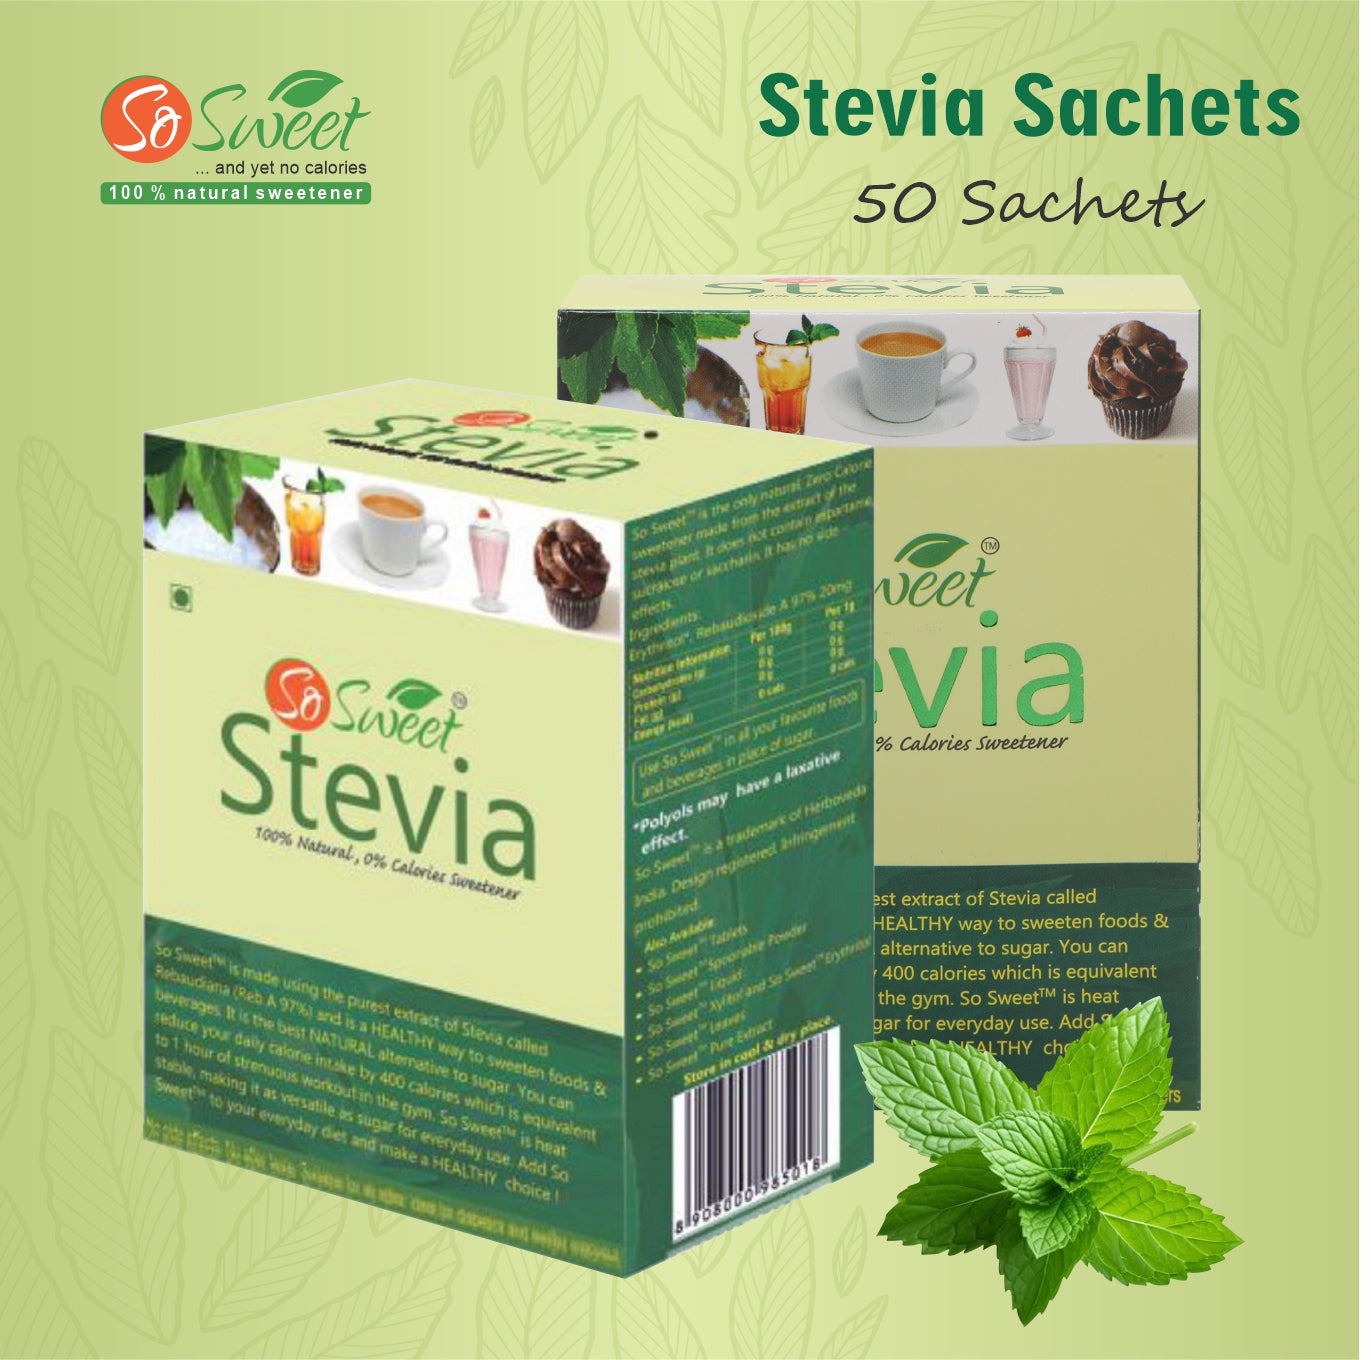 So Sweet Stevia Tablets 500 and 50 Sachets Sugar Free Natural Zero Calorie Sweetener (Pack of 2)